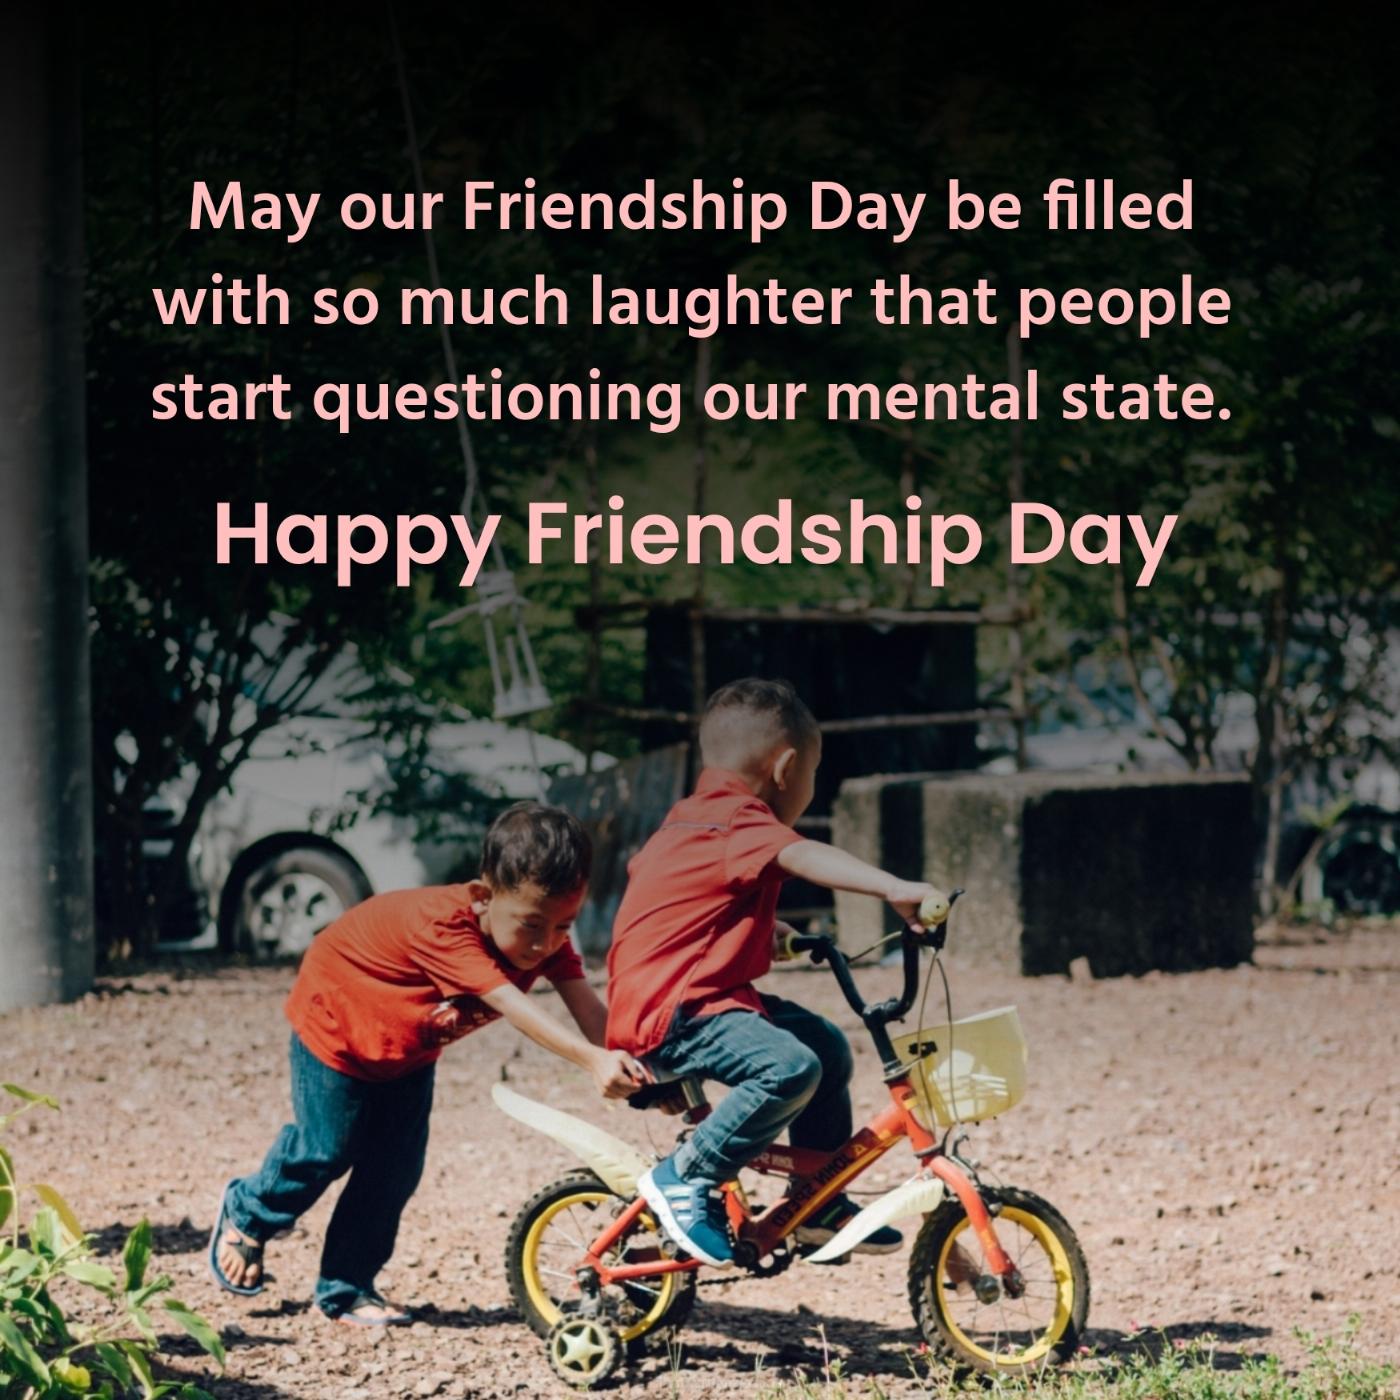 May our Friendship Day be filled with so much laughter that people start questioning